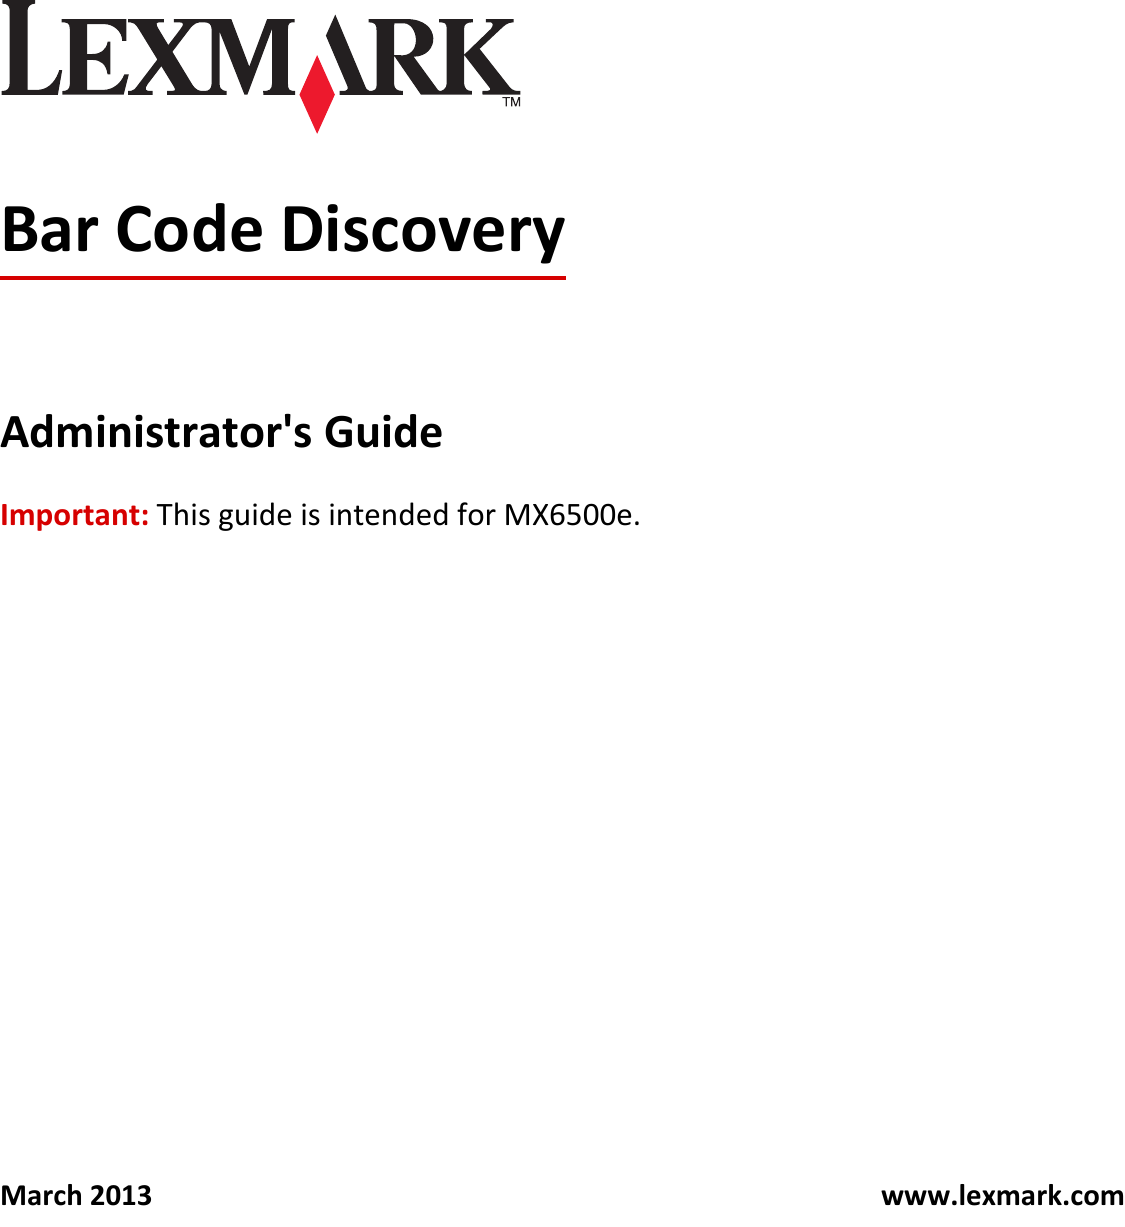 Page 1 of 12 - Lexmark Lexmark-Lexmark-Barcode-Reader-Mx6500E-Users-Manual- Administrator's Guide  Lexmark-lexmark-barcode-reader-mx6500e-users-manual